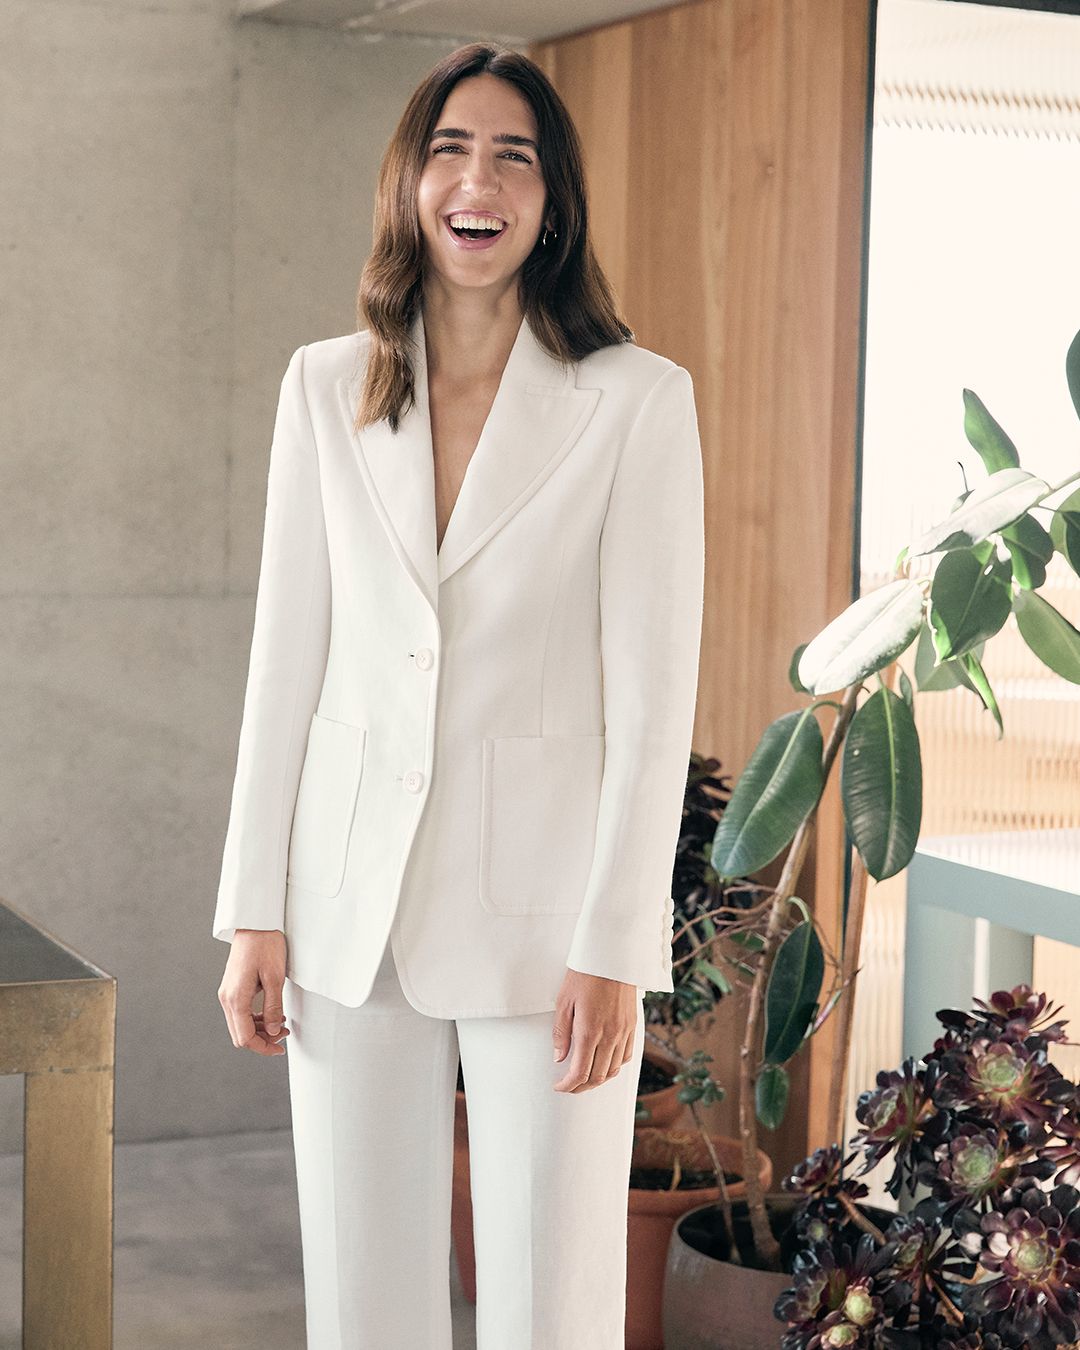 Bianca Marchi smiling in a white pantsuit posing next to a potted plant